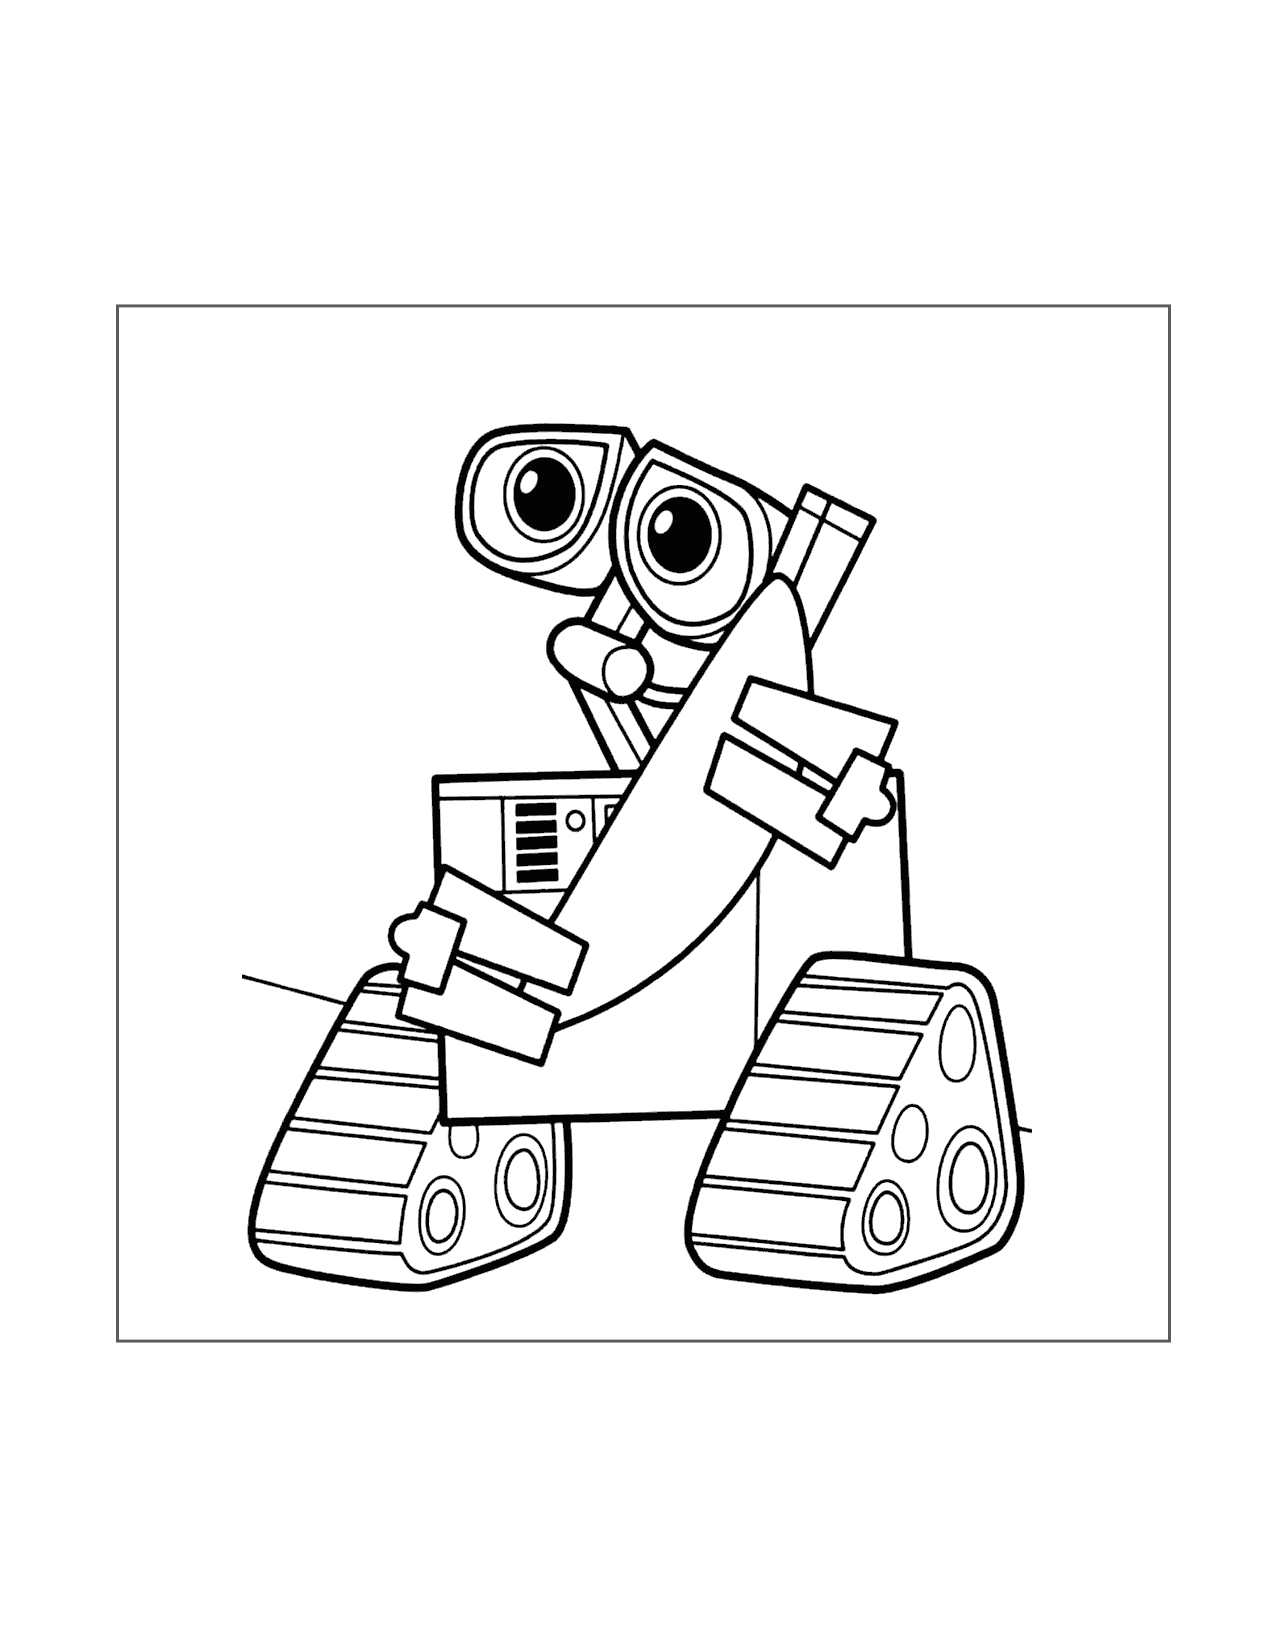 Sweet Wall E Coloring Page